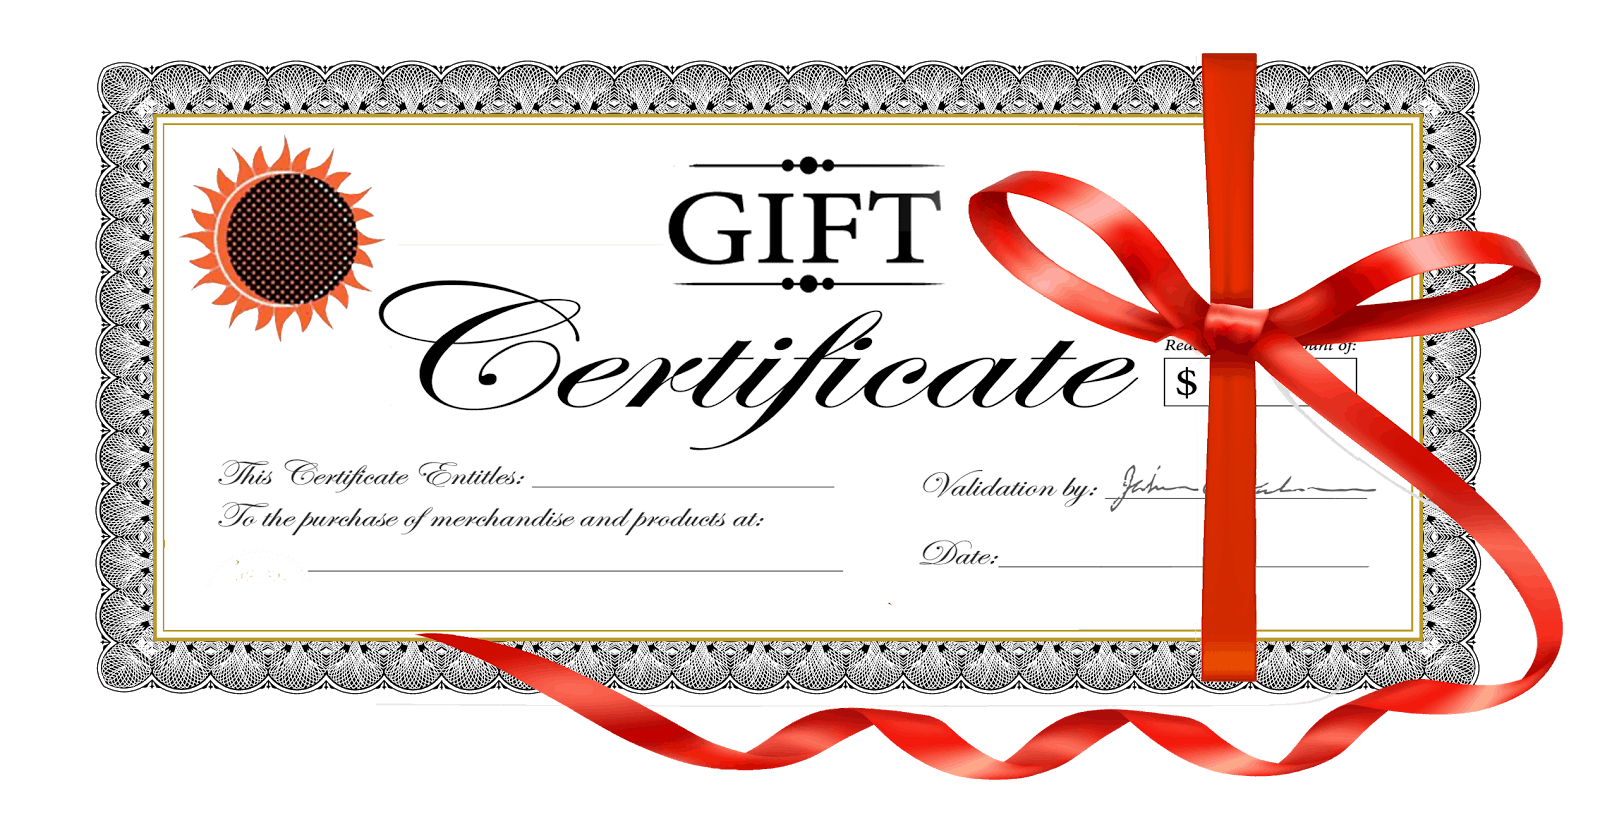 Gift Certificate Template 8